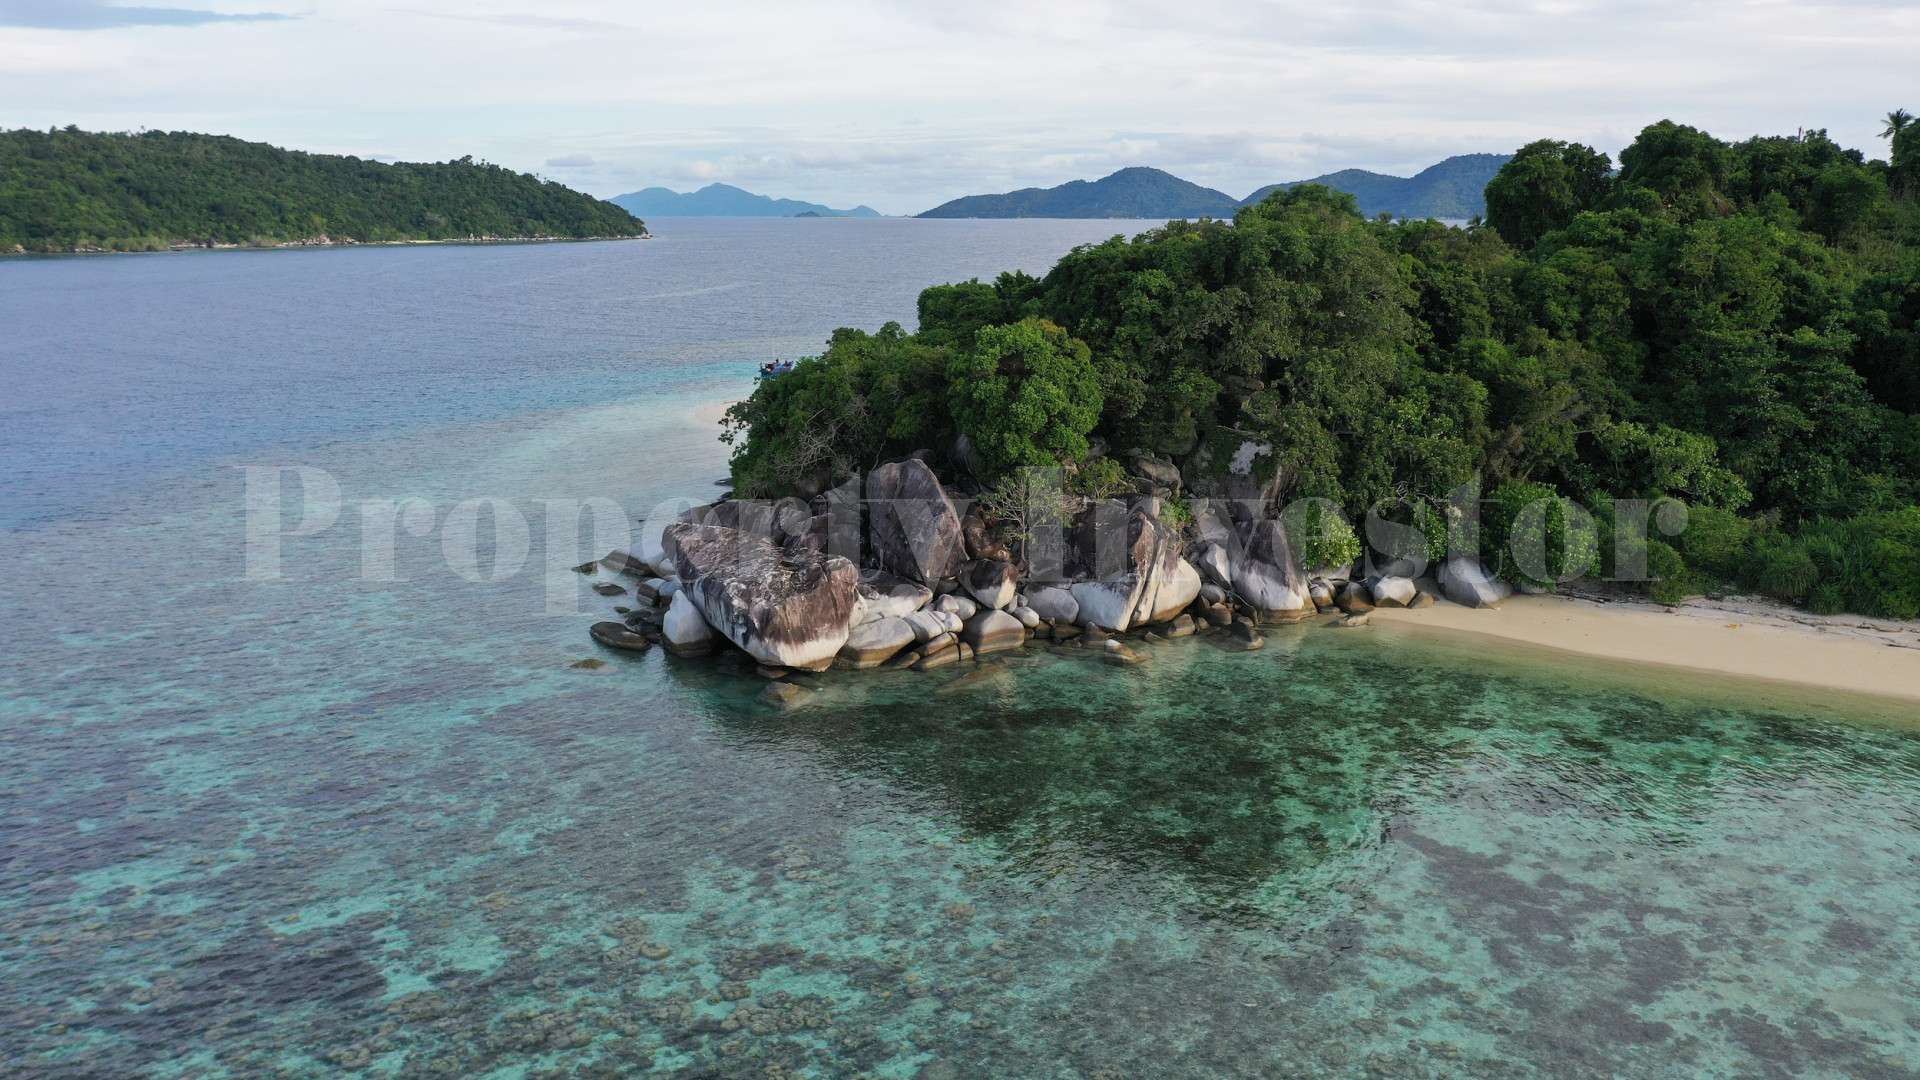 Pristine 27 Hectare Virgin Island for Commercial Development in the Riau Islands, Indonesia